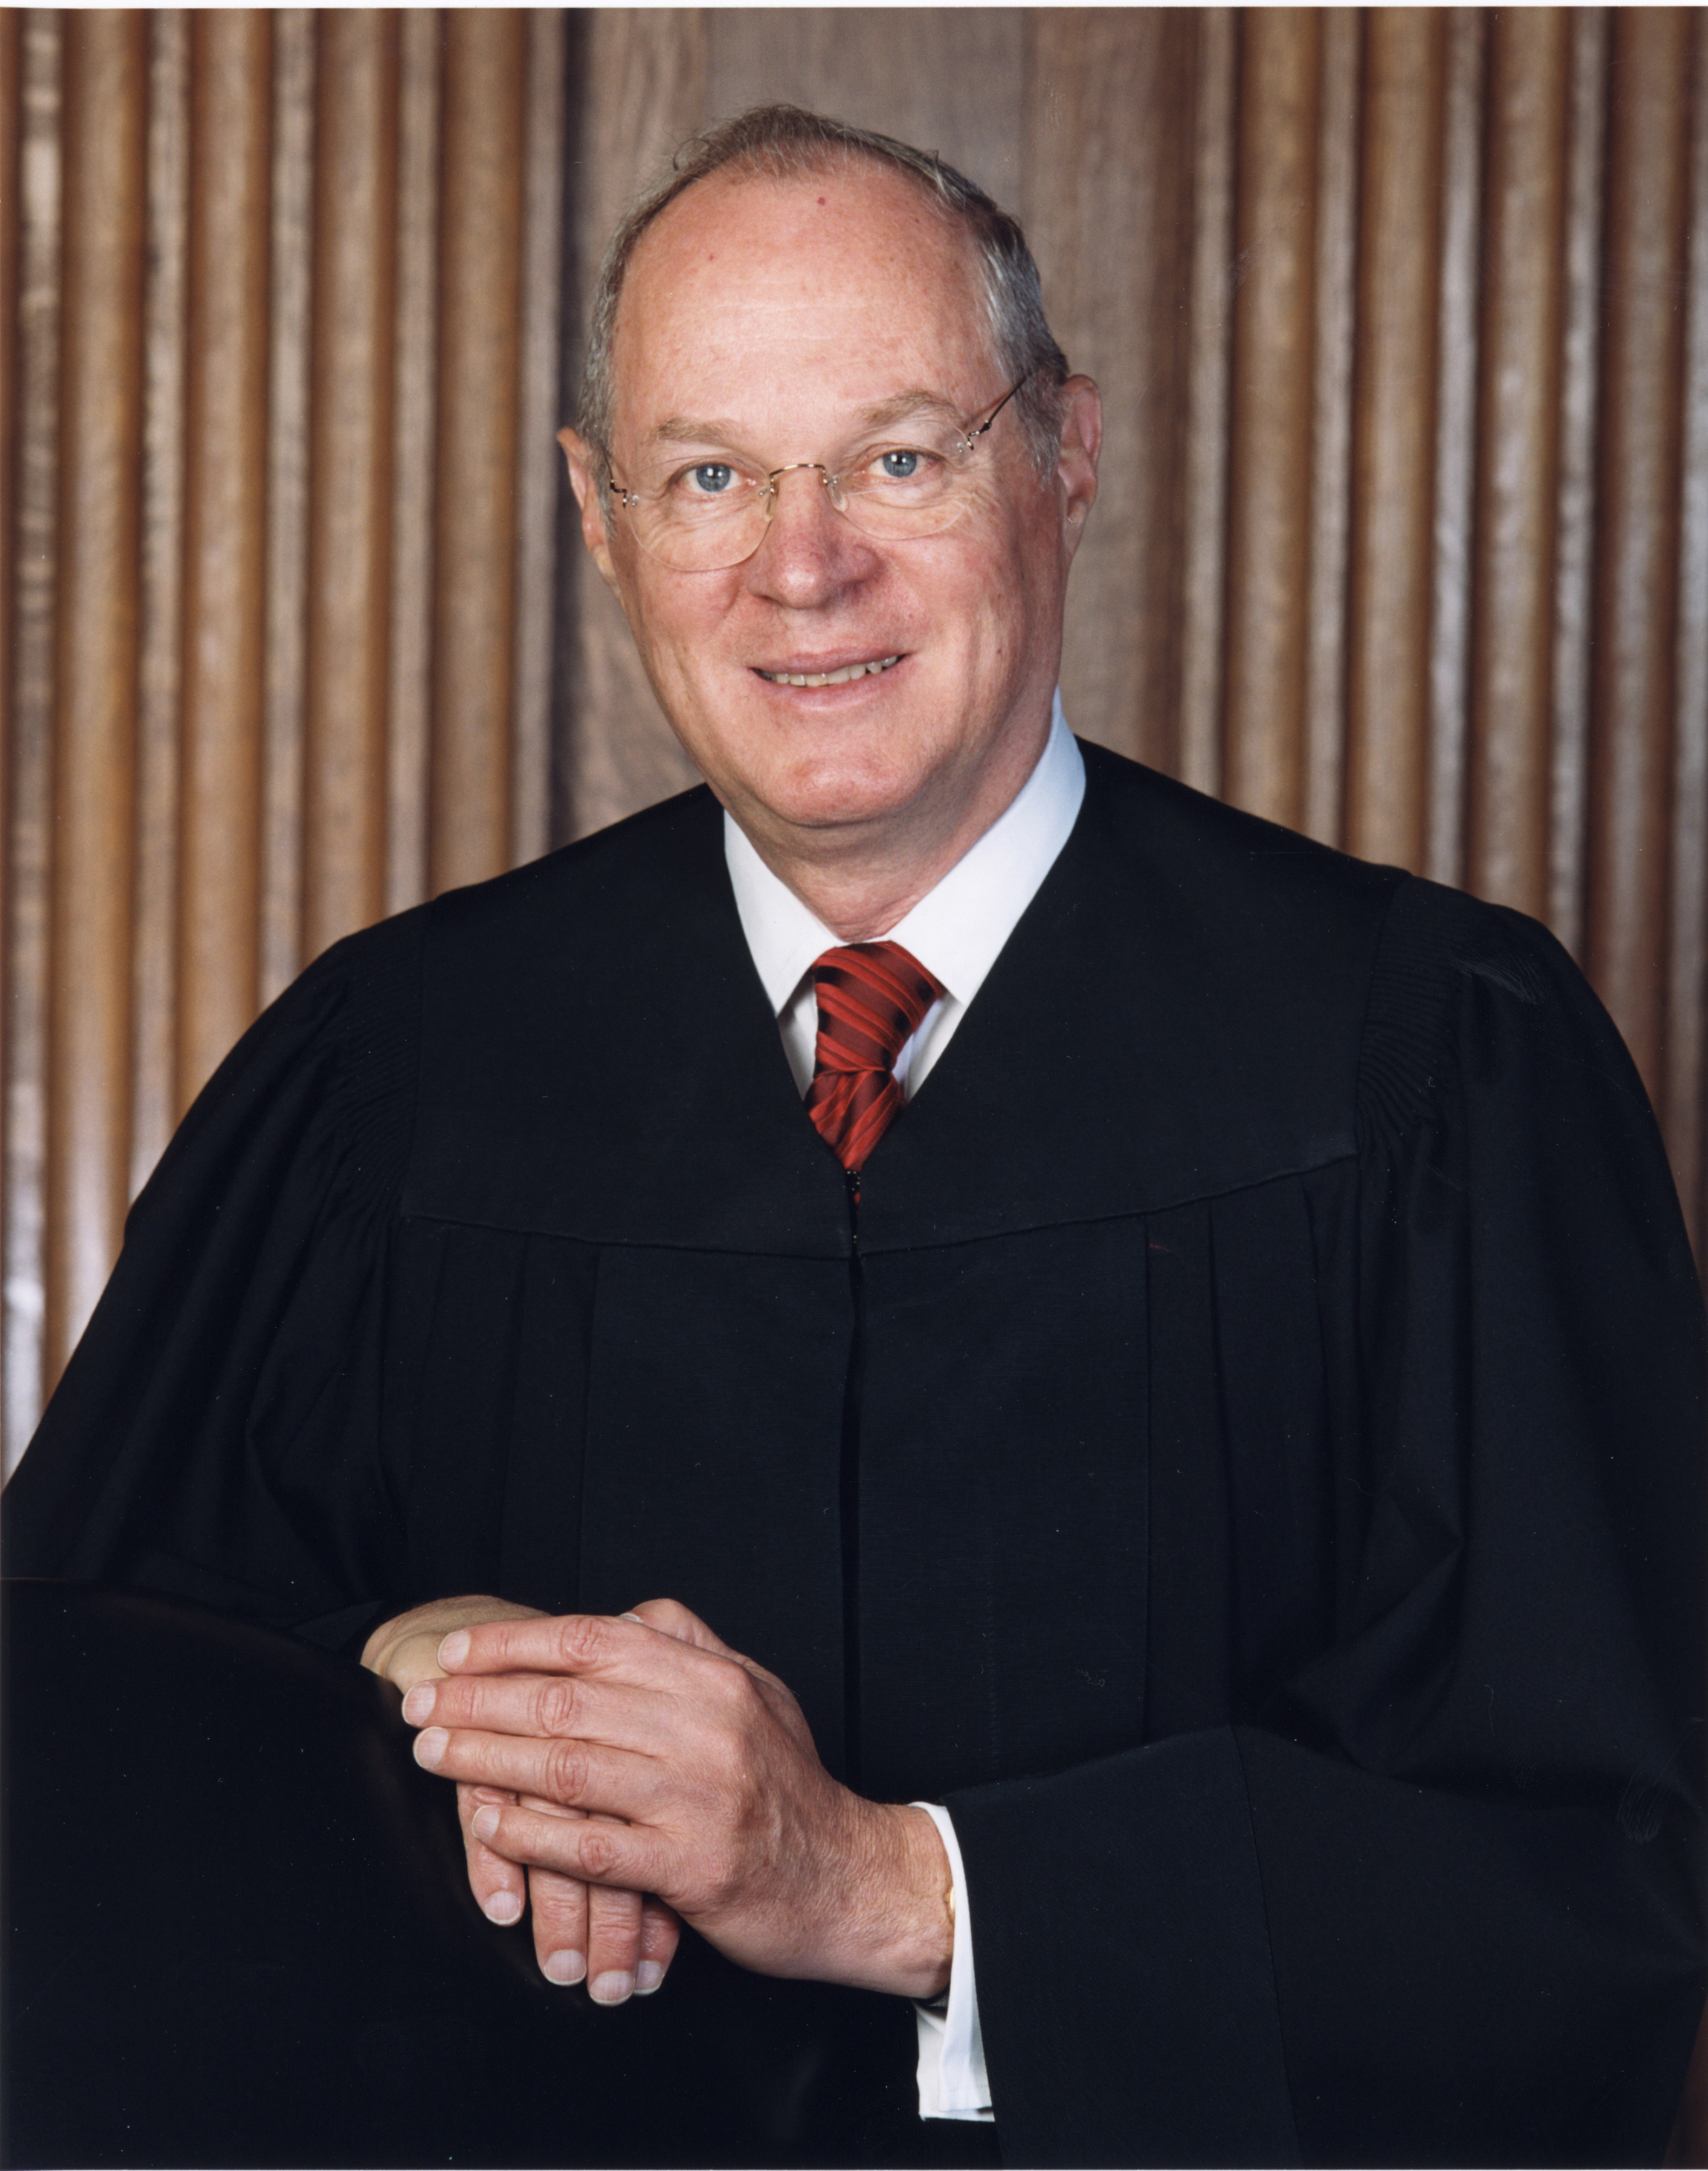 justice kennedy